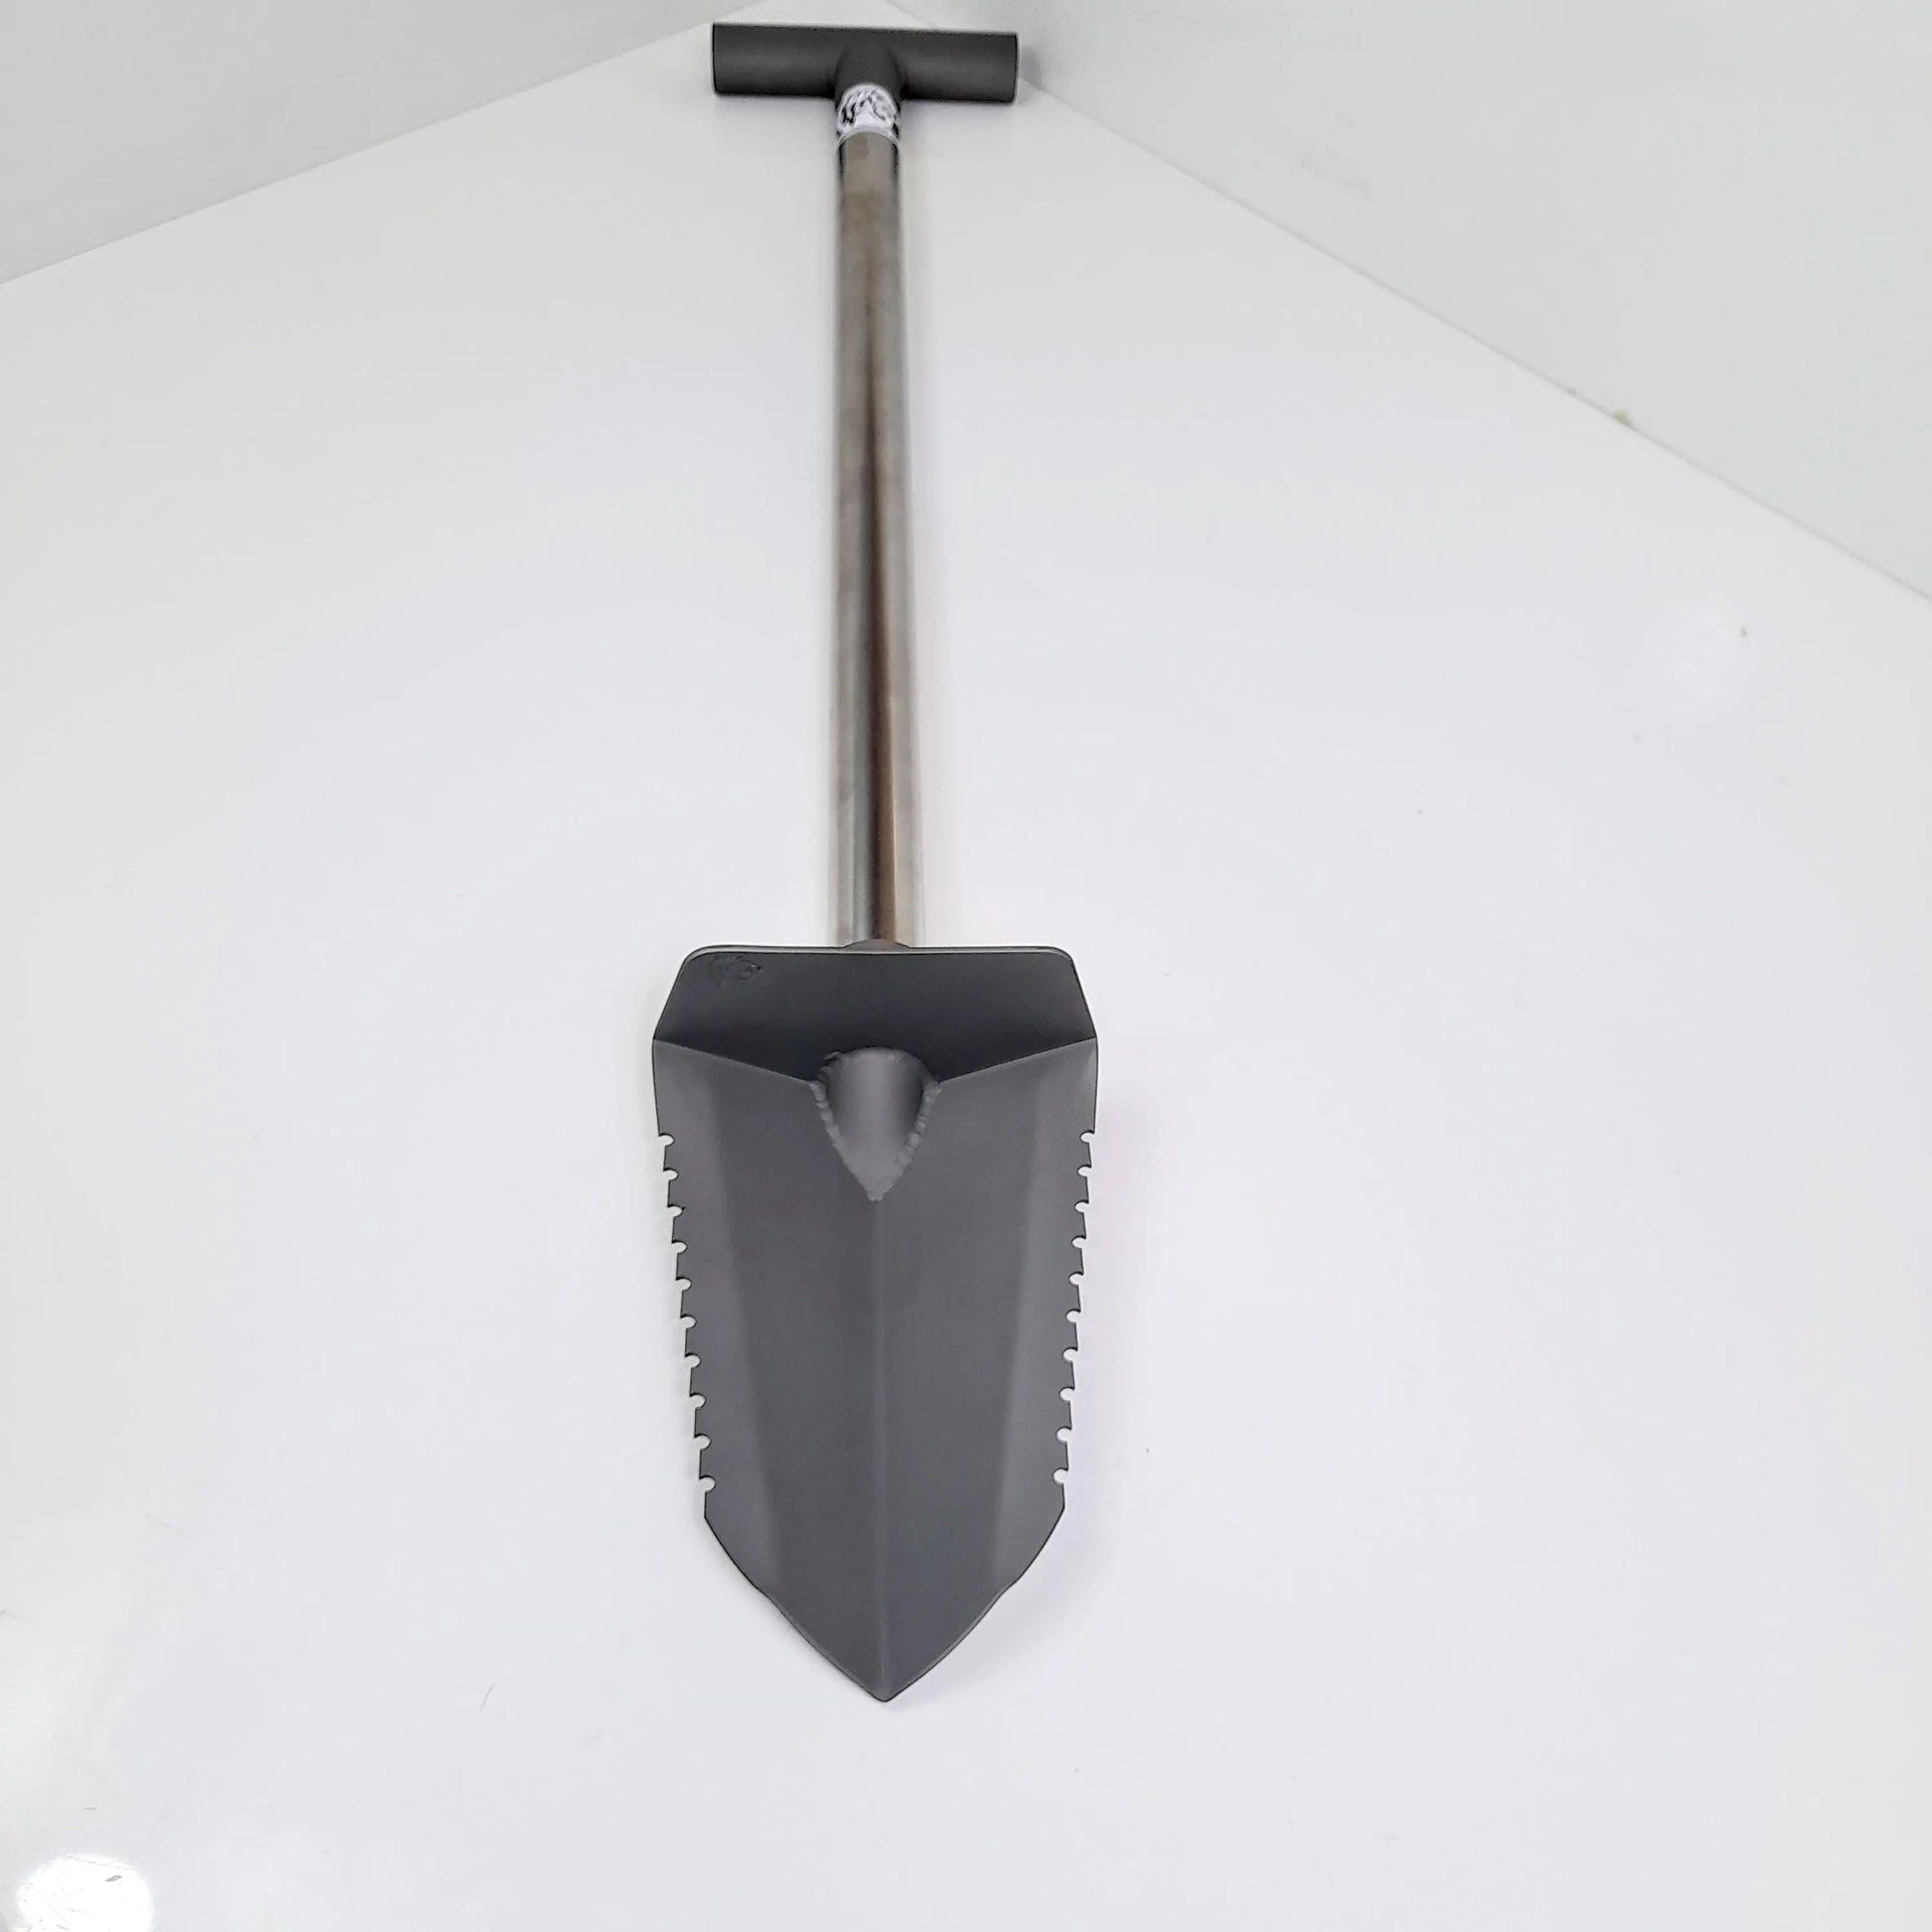 Tyger Stainless Stand up Digging Tool - the Digger Tyger Stainless Steel